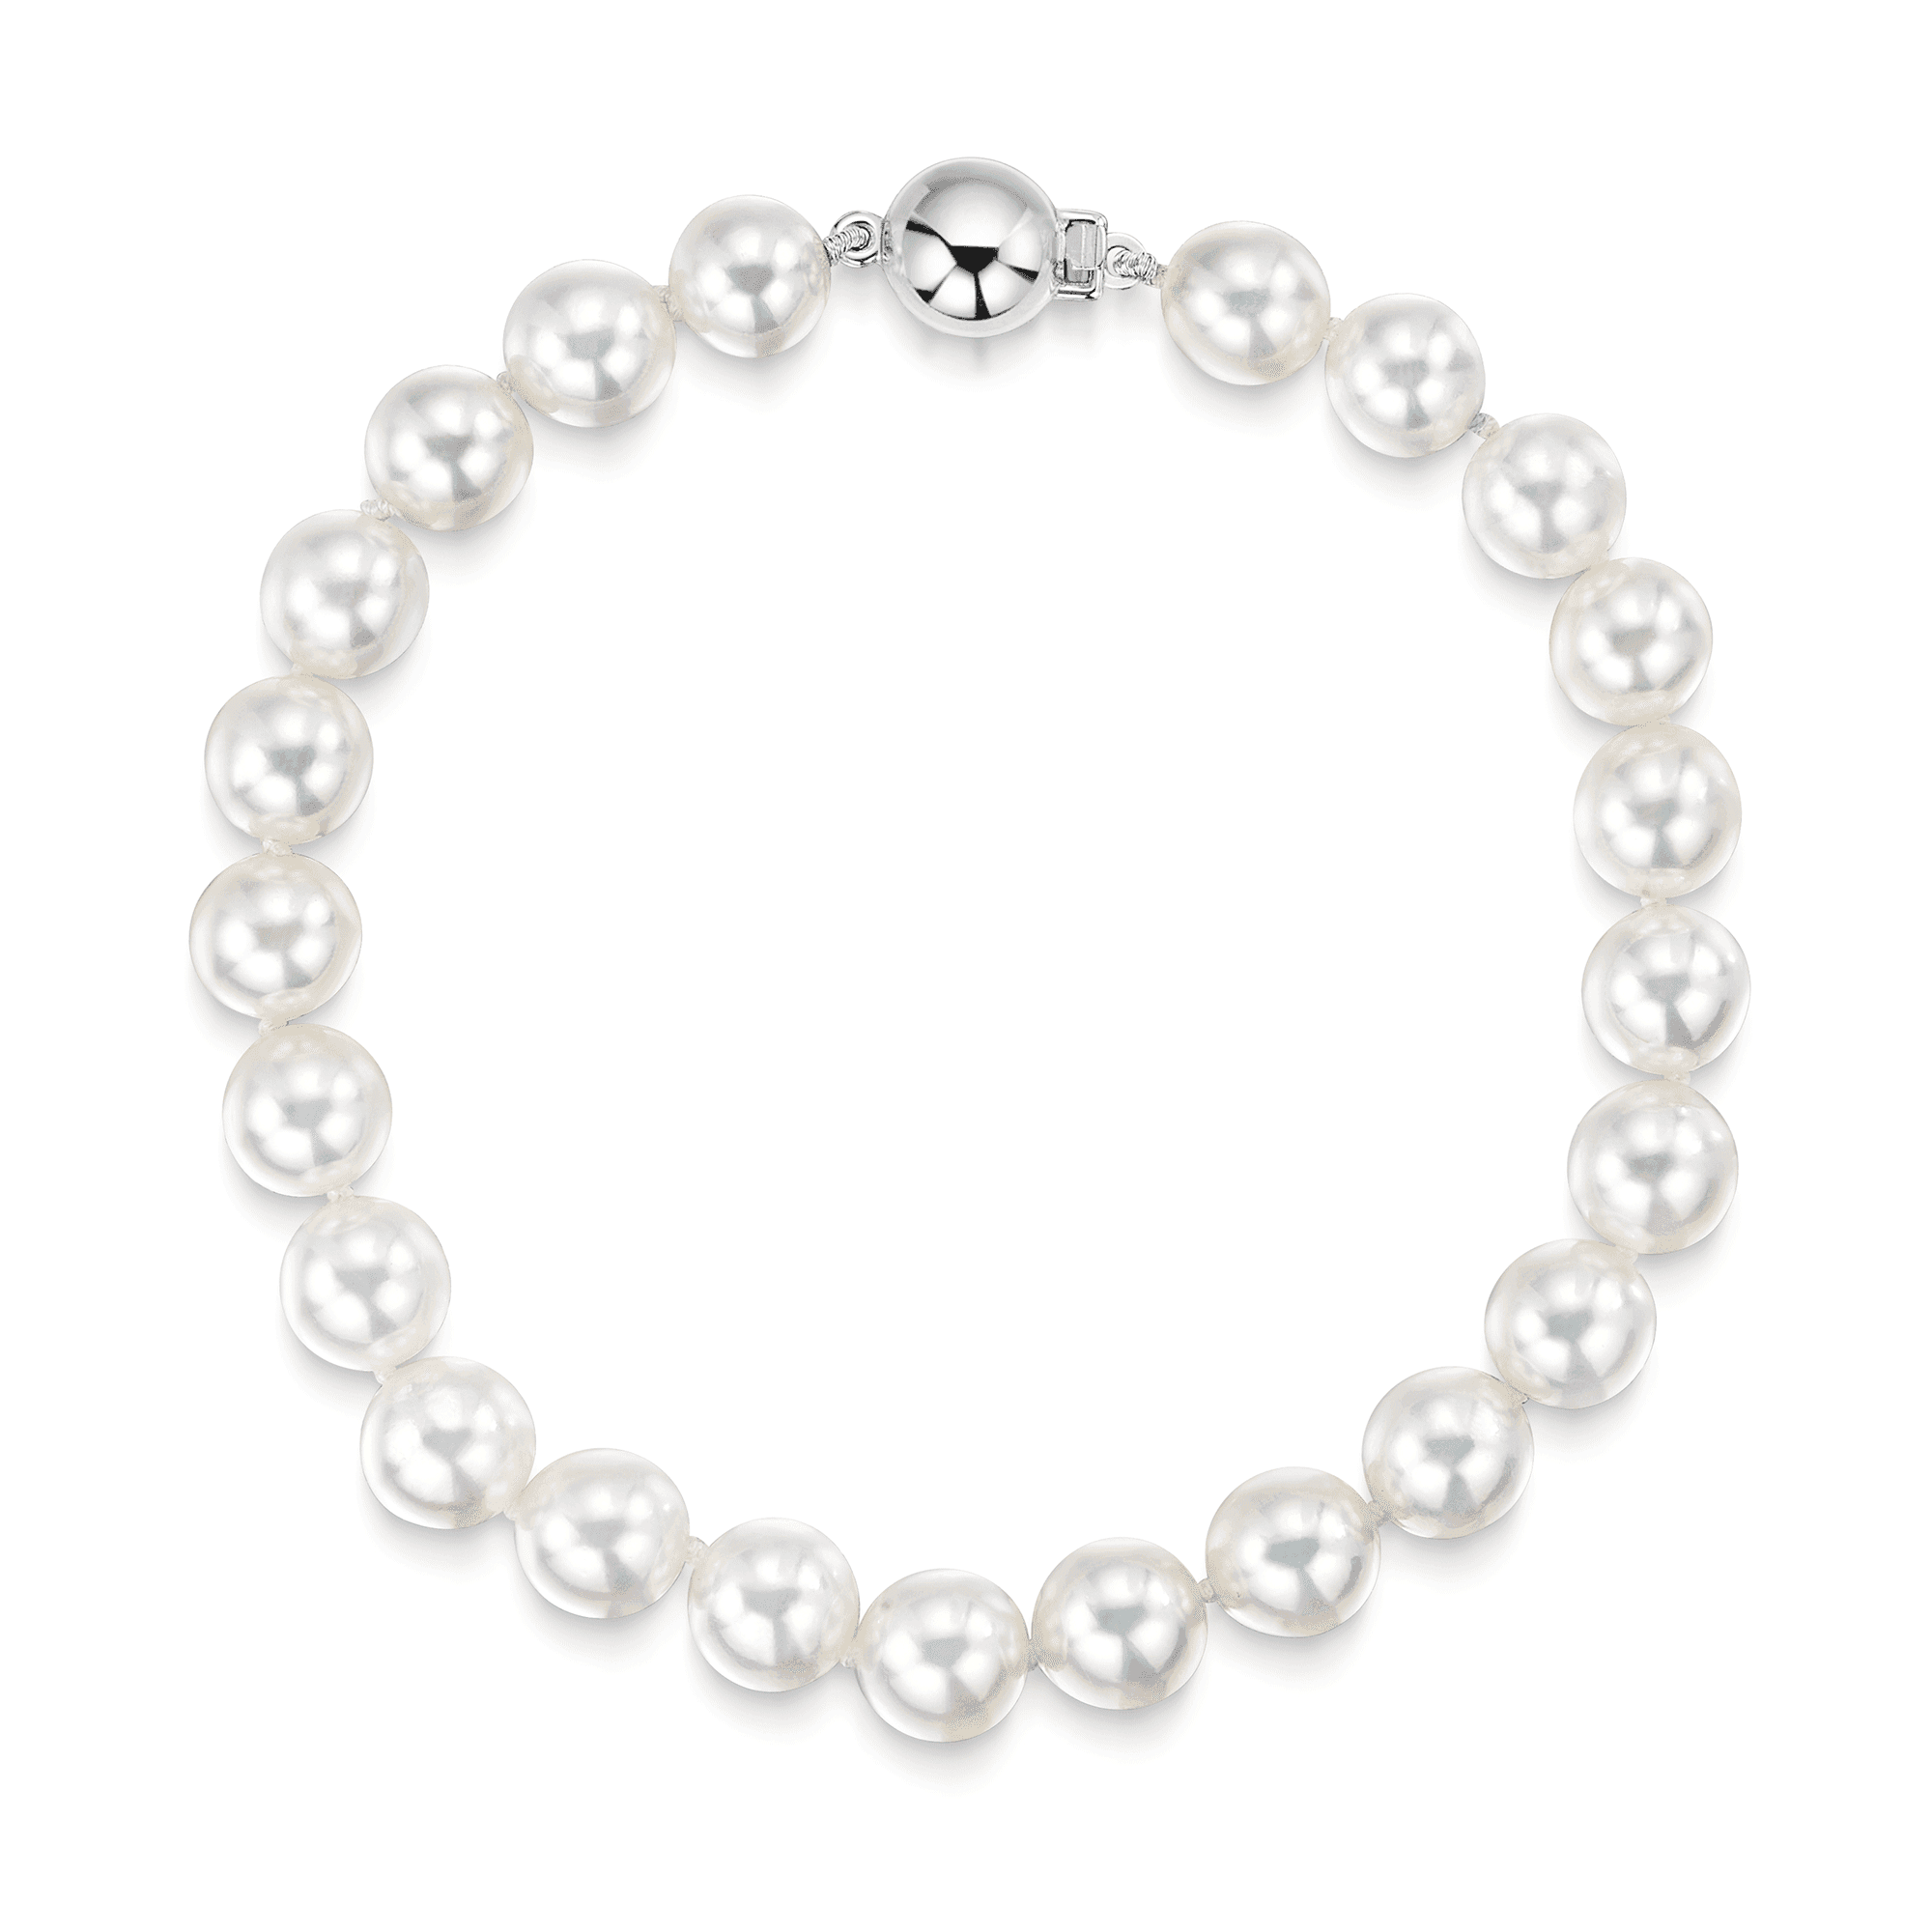 Single Strand 7-7.5mm Akoya Pearl Bracelet With 18ct White Gold Clasp